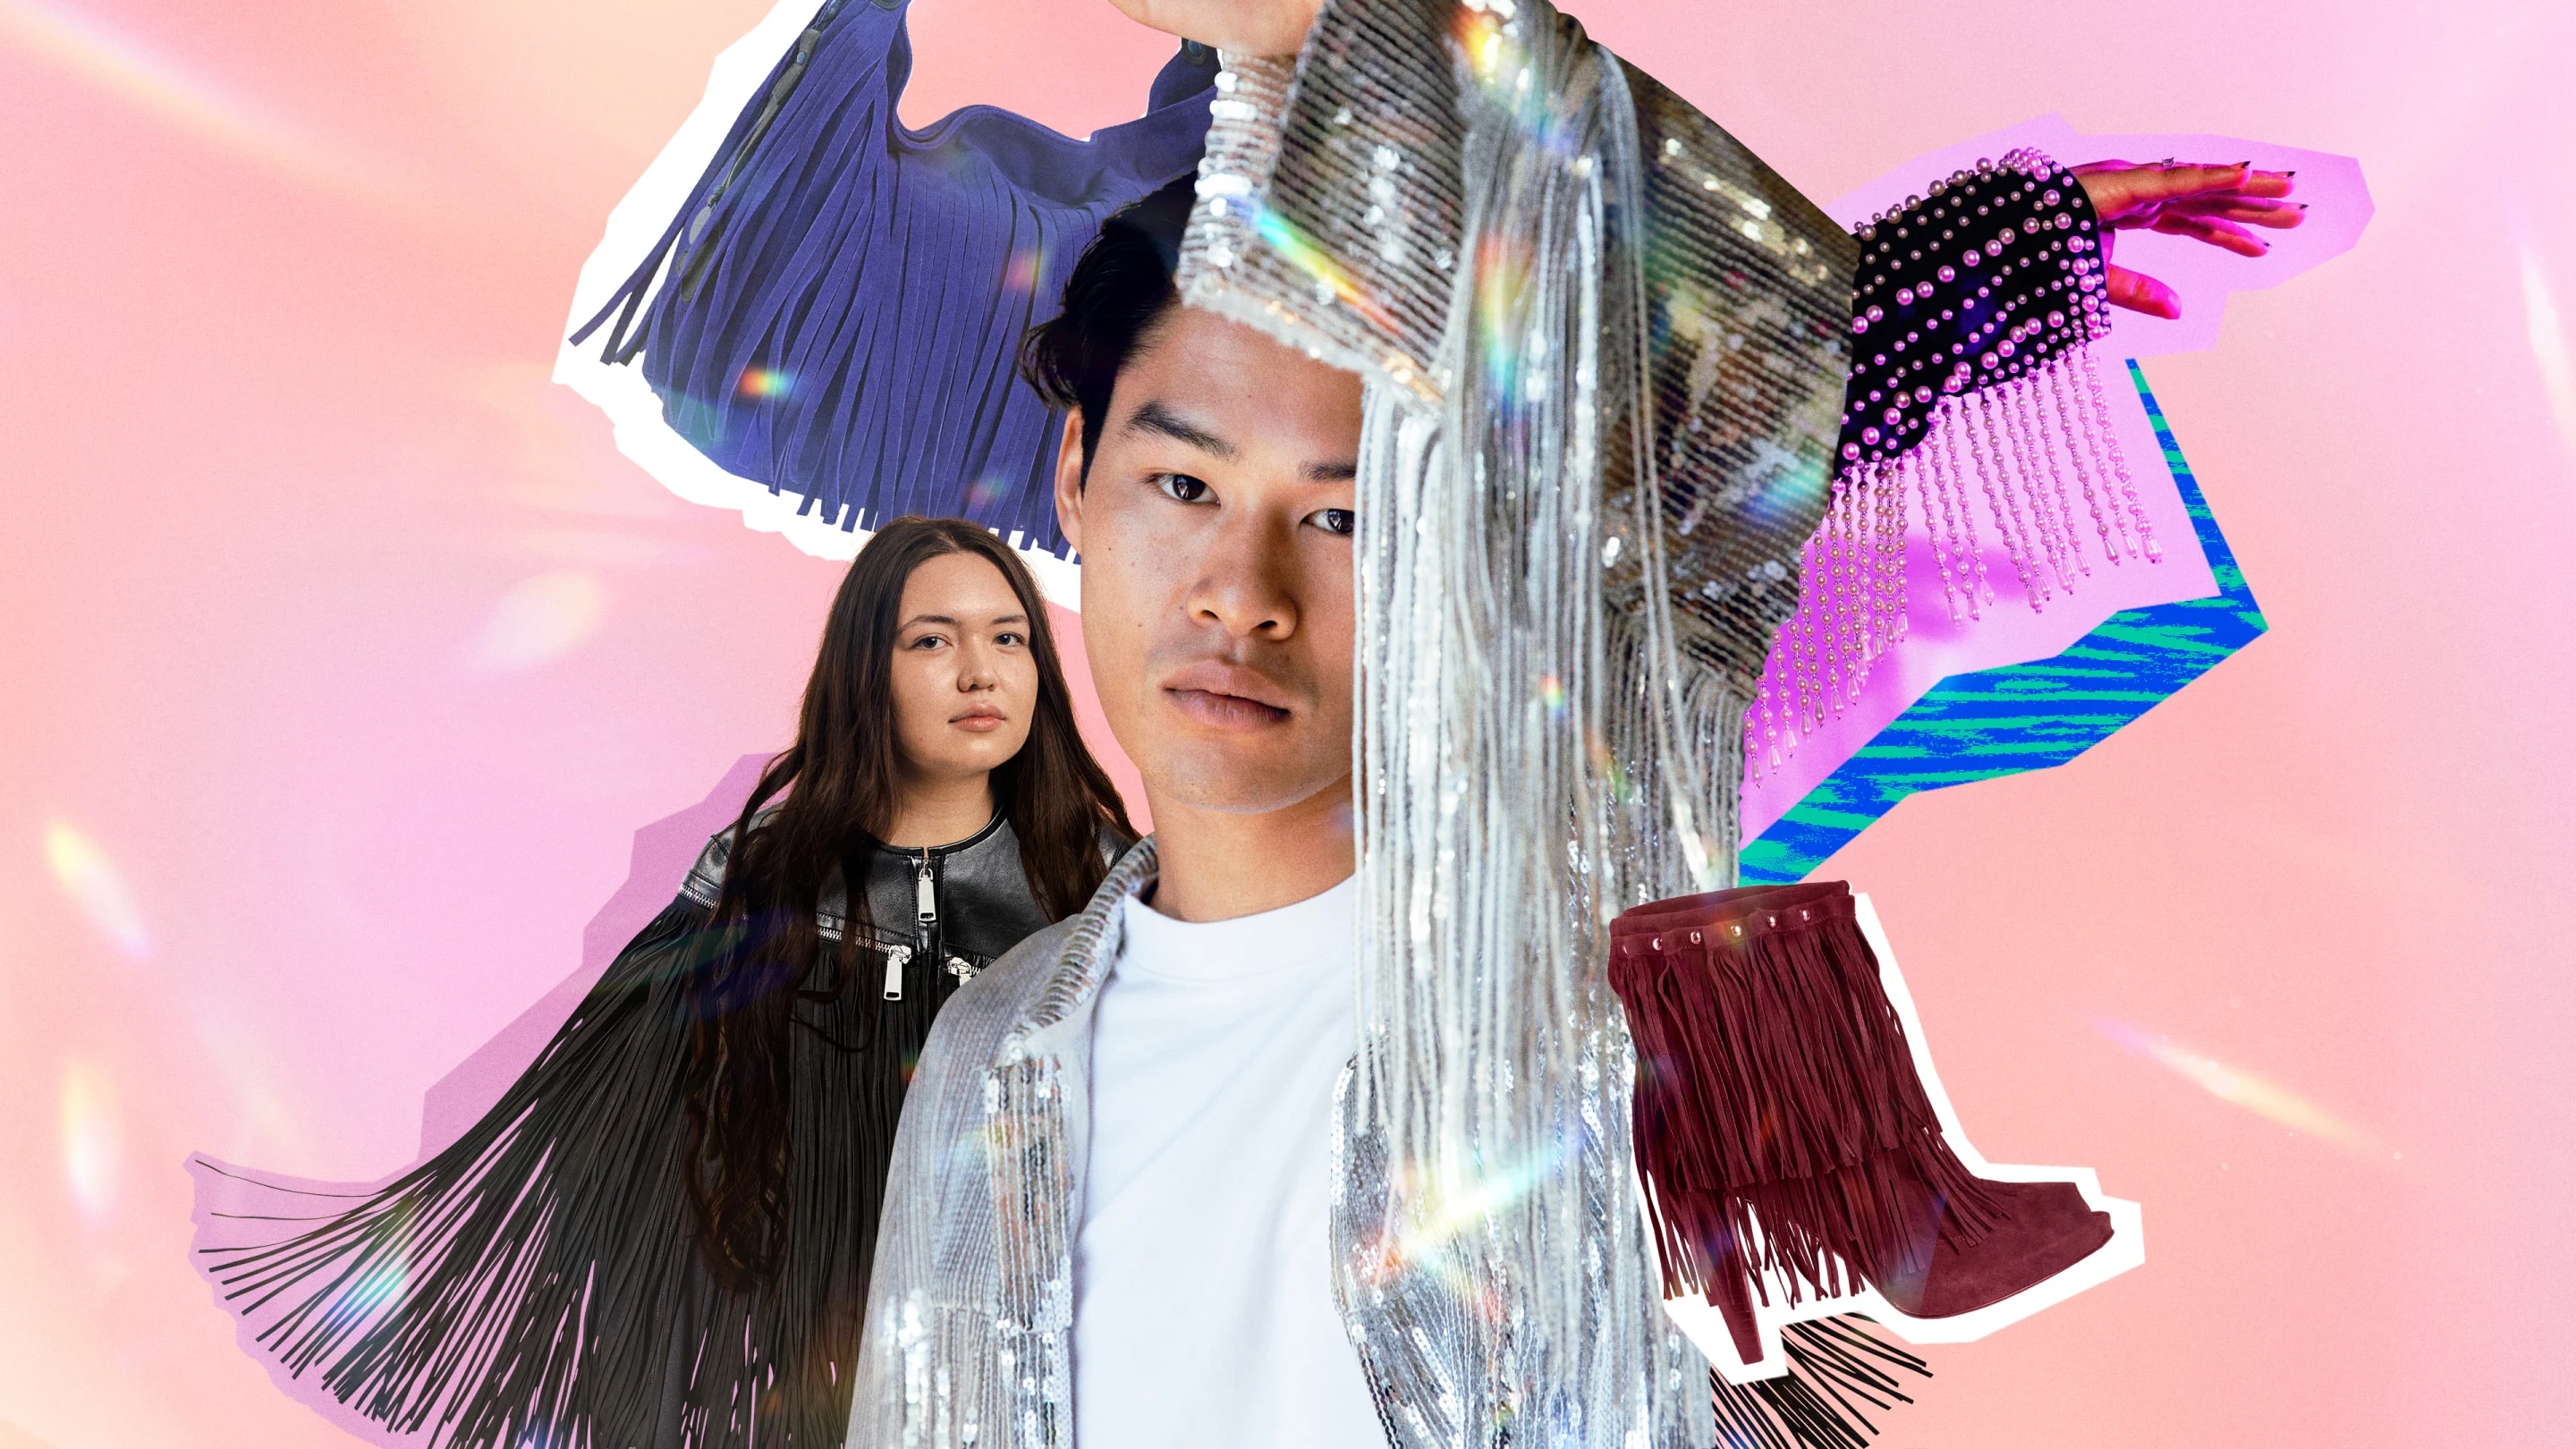 A collage of an Asian man and a Latiné woman wearing fringed clothing, surrounded by an arm with a beaded sleeve and fringed brown boots.